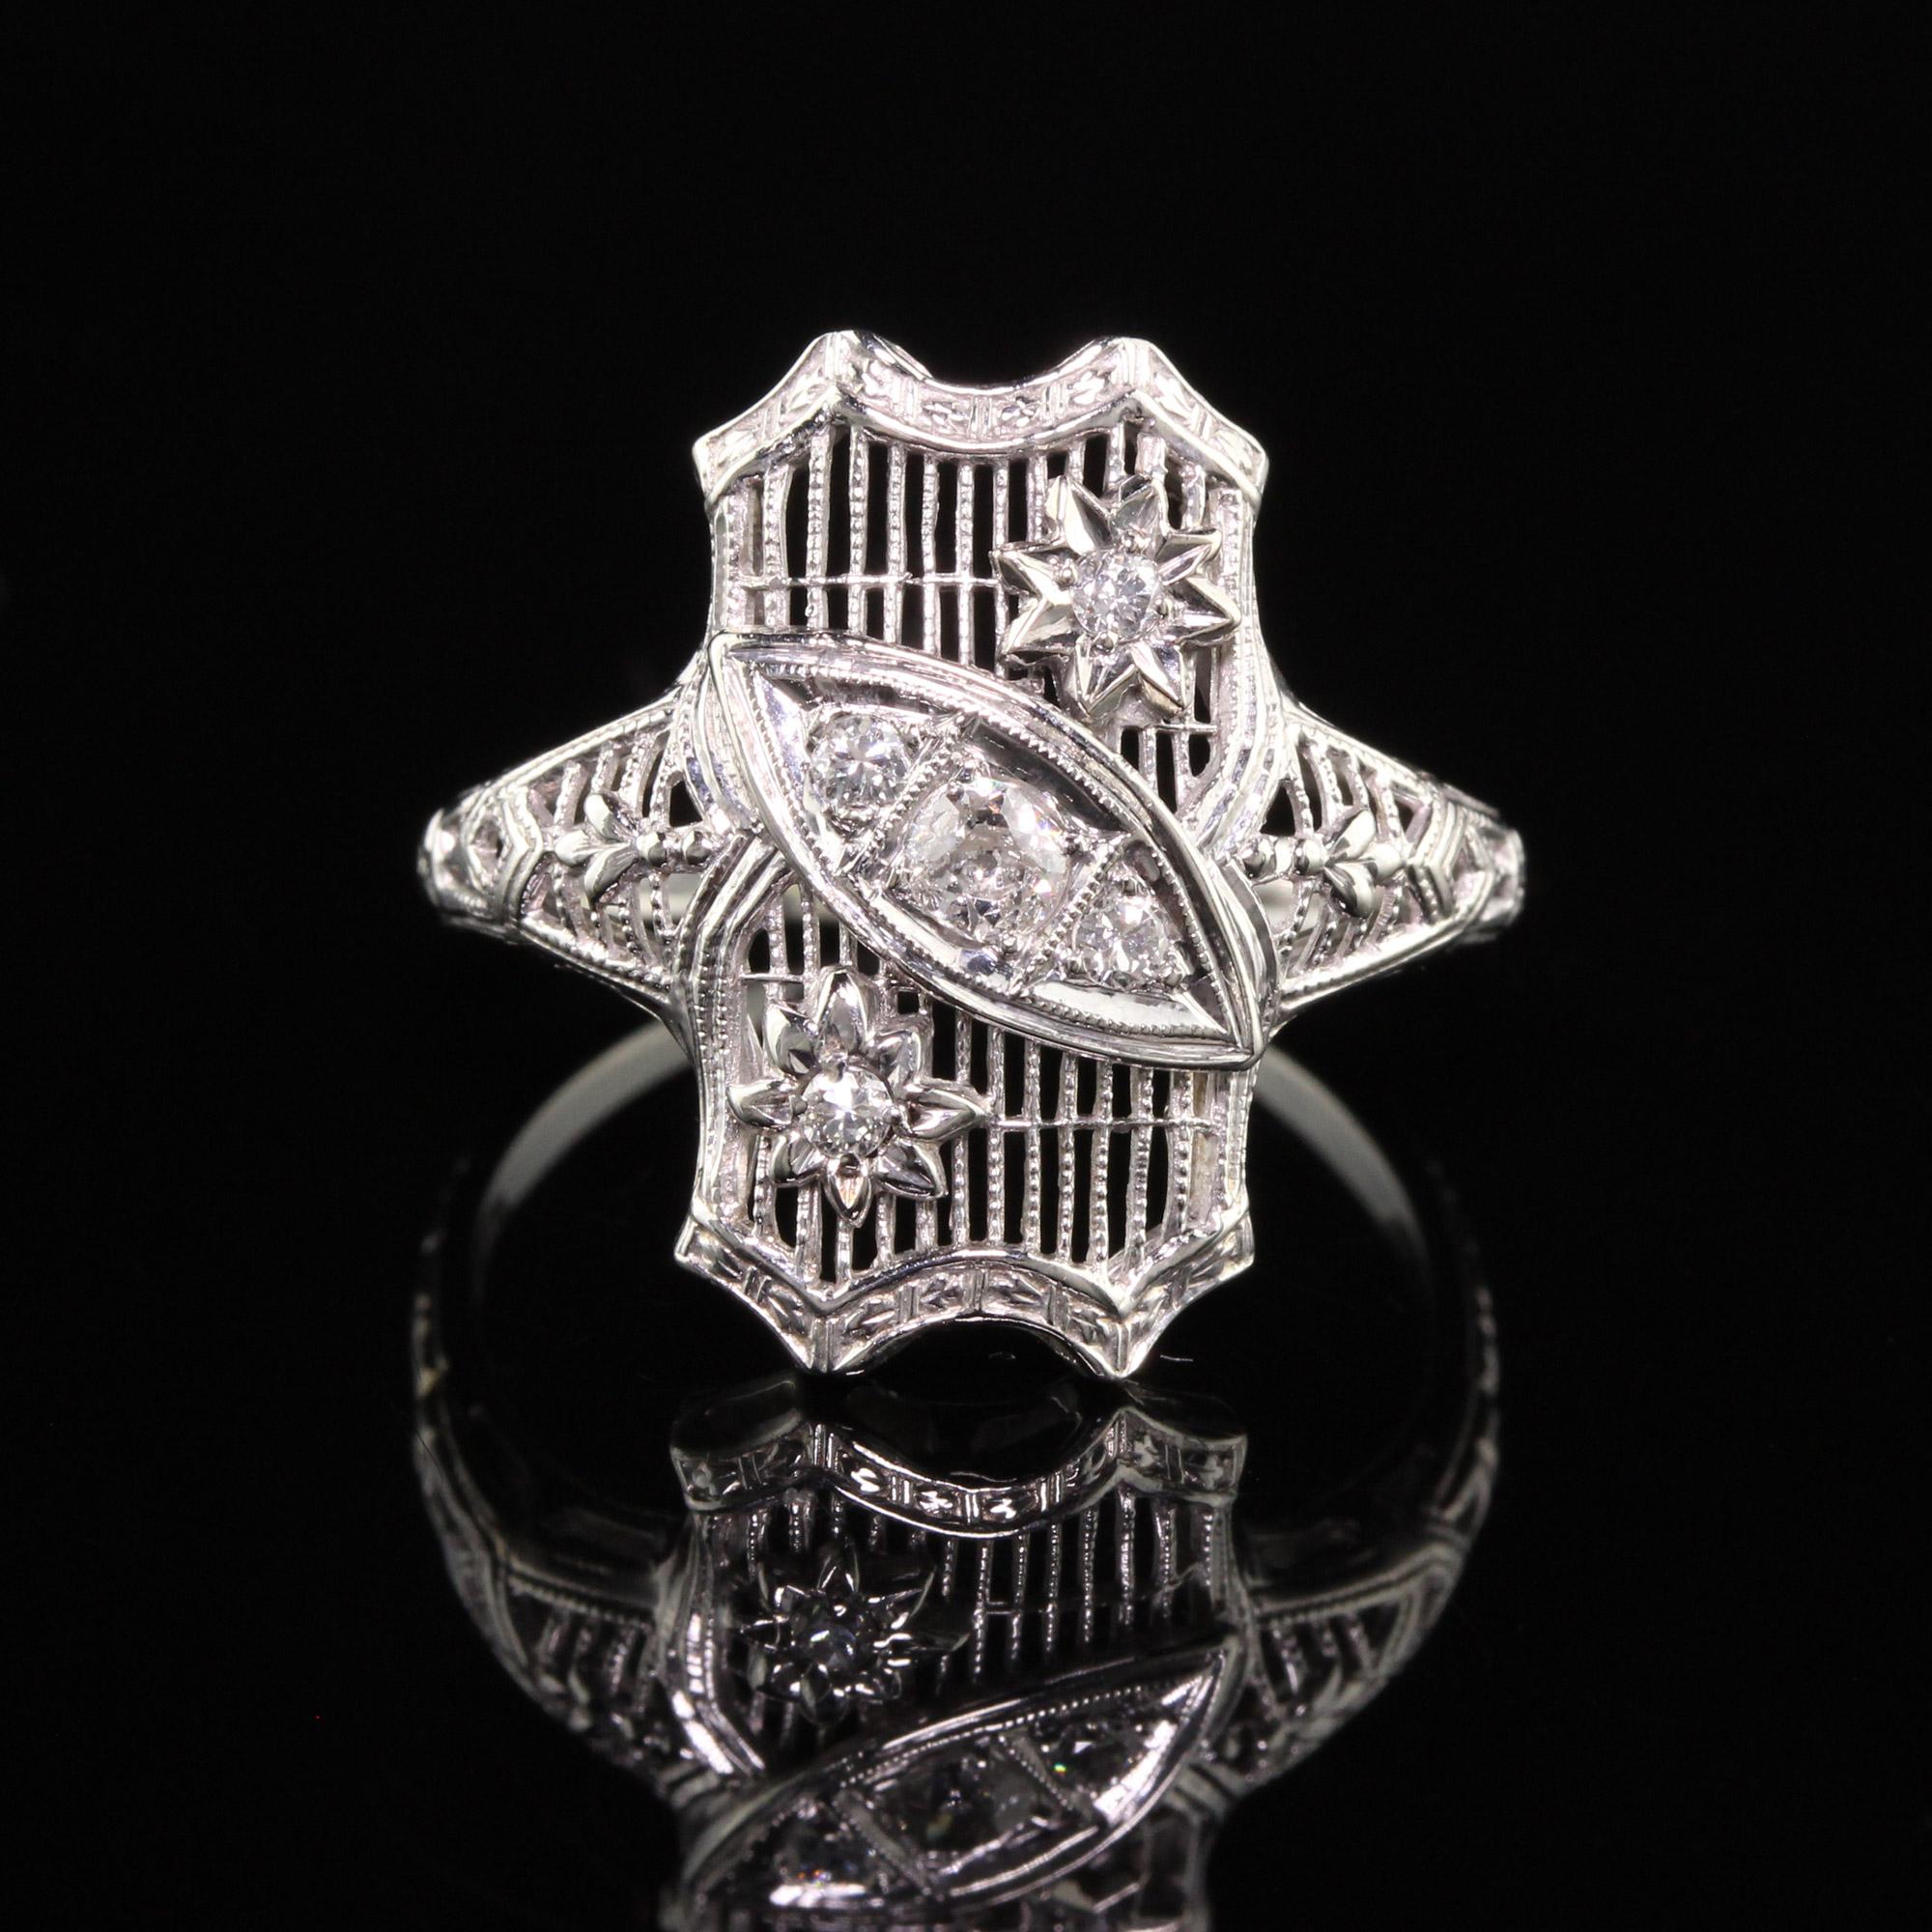 Antique Art Deco 18K White Gold Old European Diamond Filigree Ring In Good Condition For Sale In Great Neck, NY